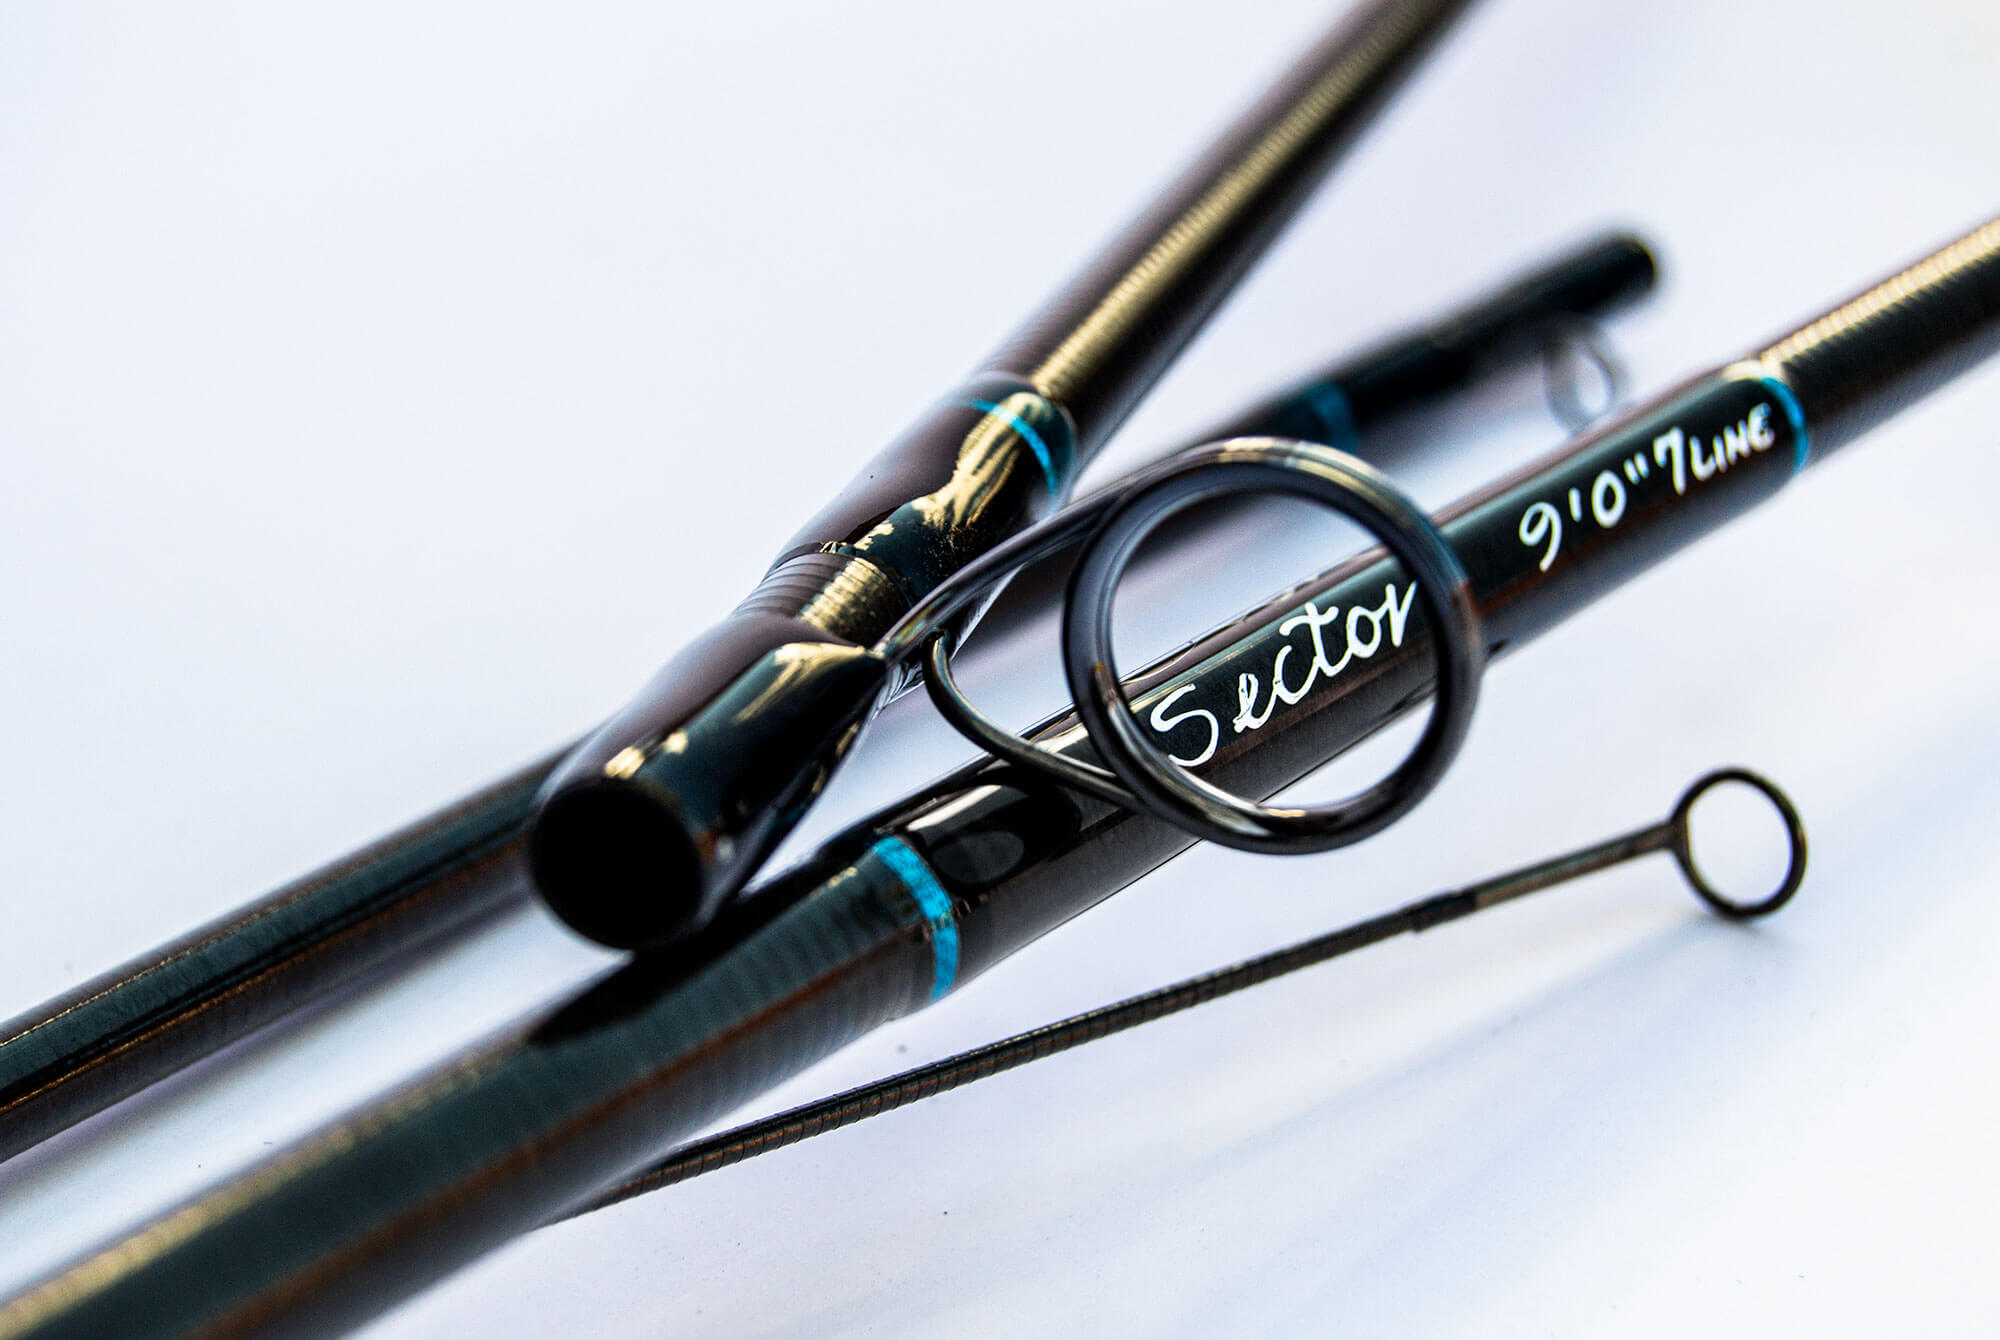 Scott Sector Saltwater Fly Rod - Duranglers Fly Fishing Shop & Guides